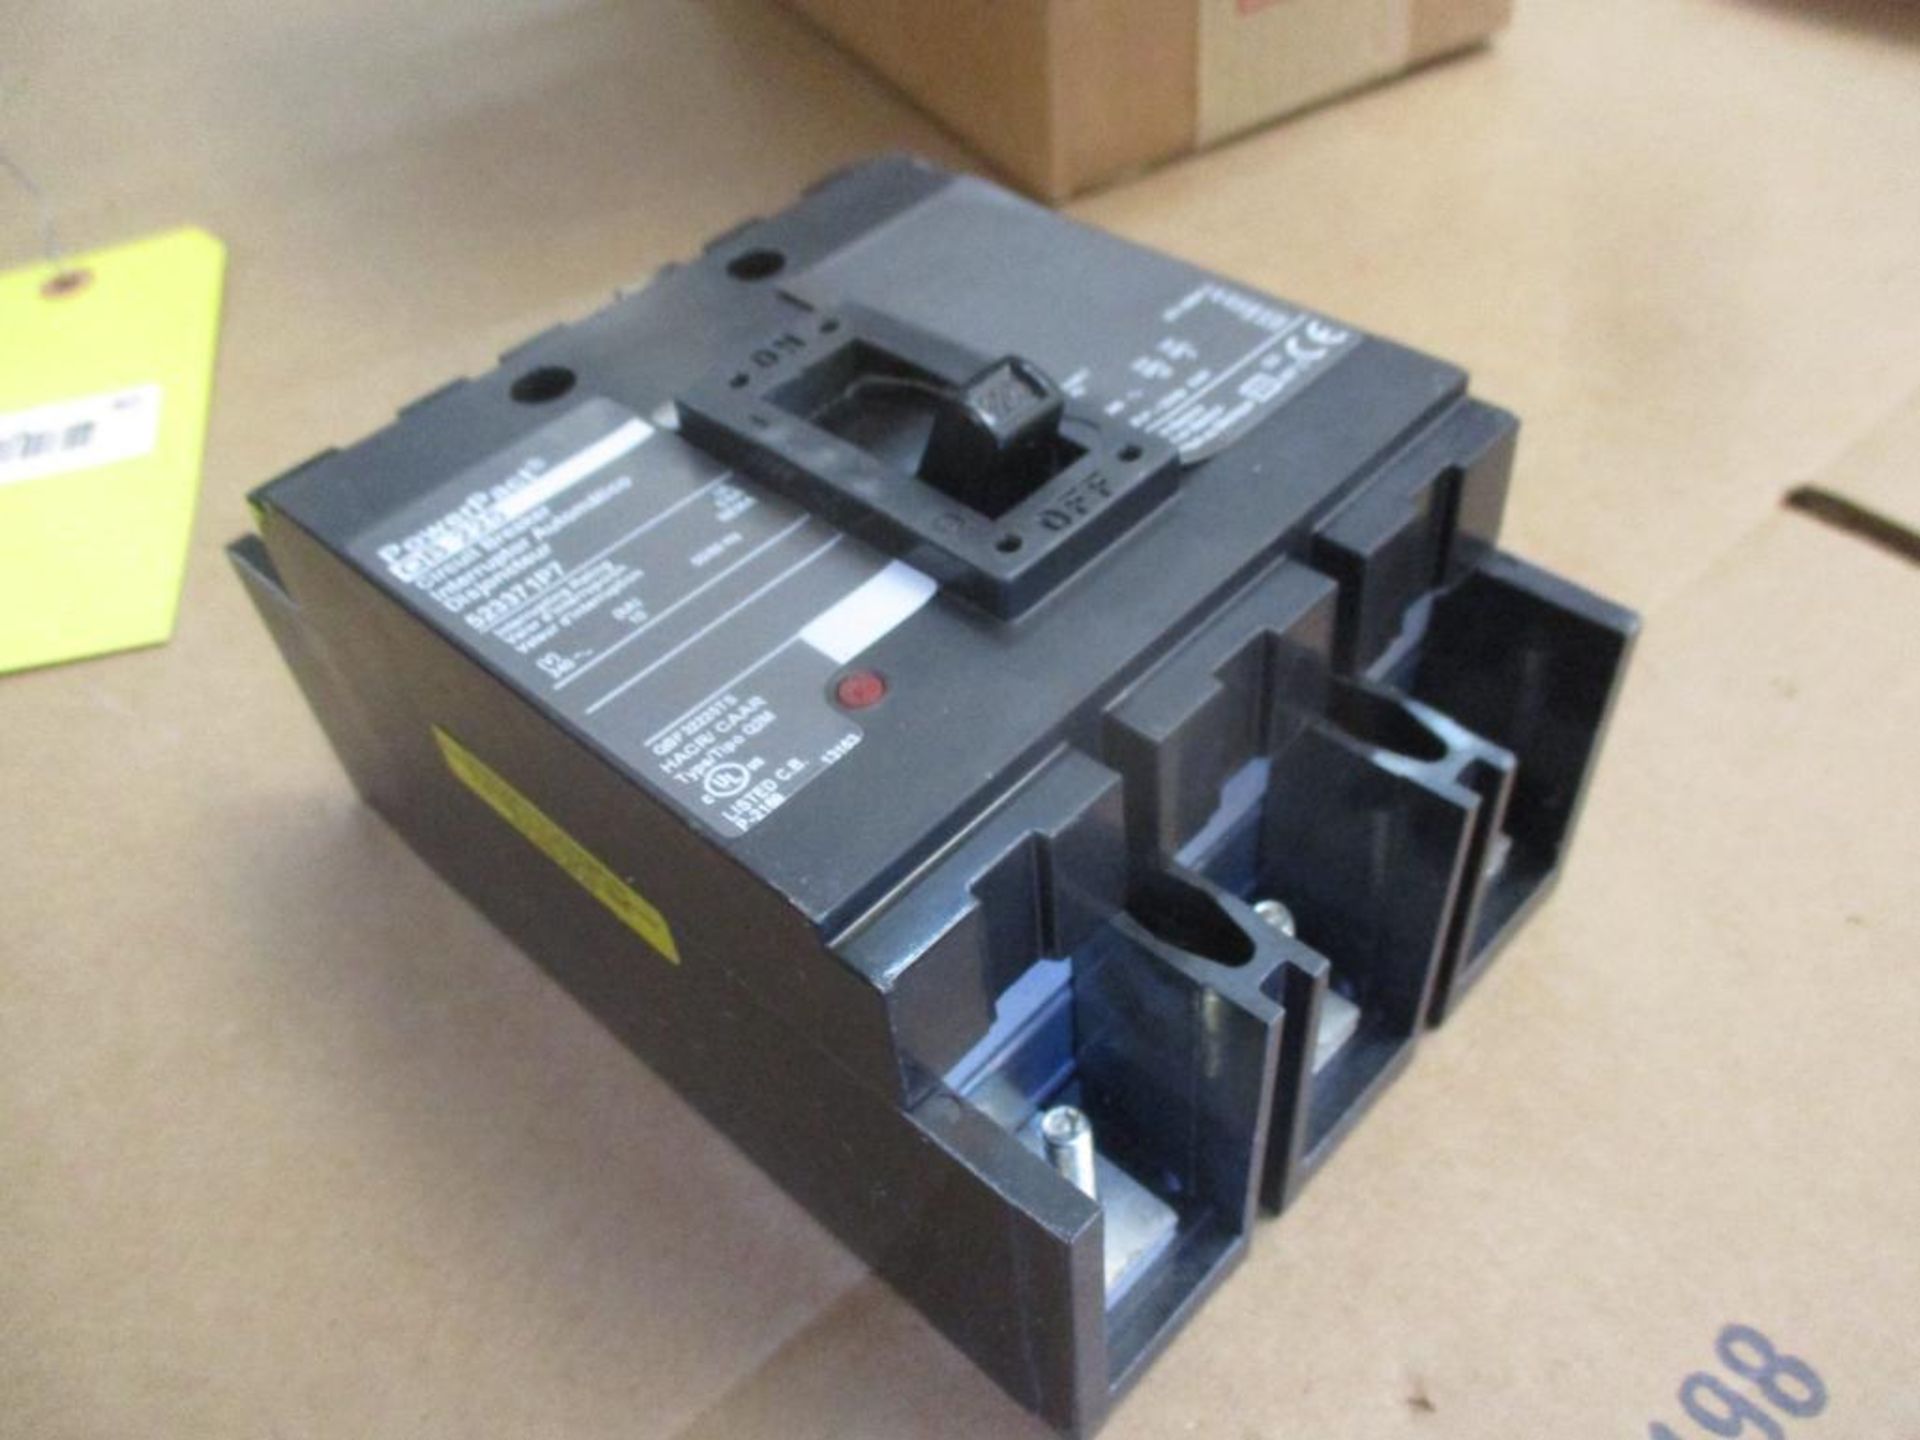 Square D 225 AMP Circuit Breaker, 523371P7, 225A, 3P, 240VAC, PowerPacT QB225 (New in Box) - Image 2 of 4